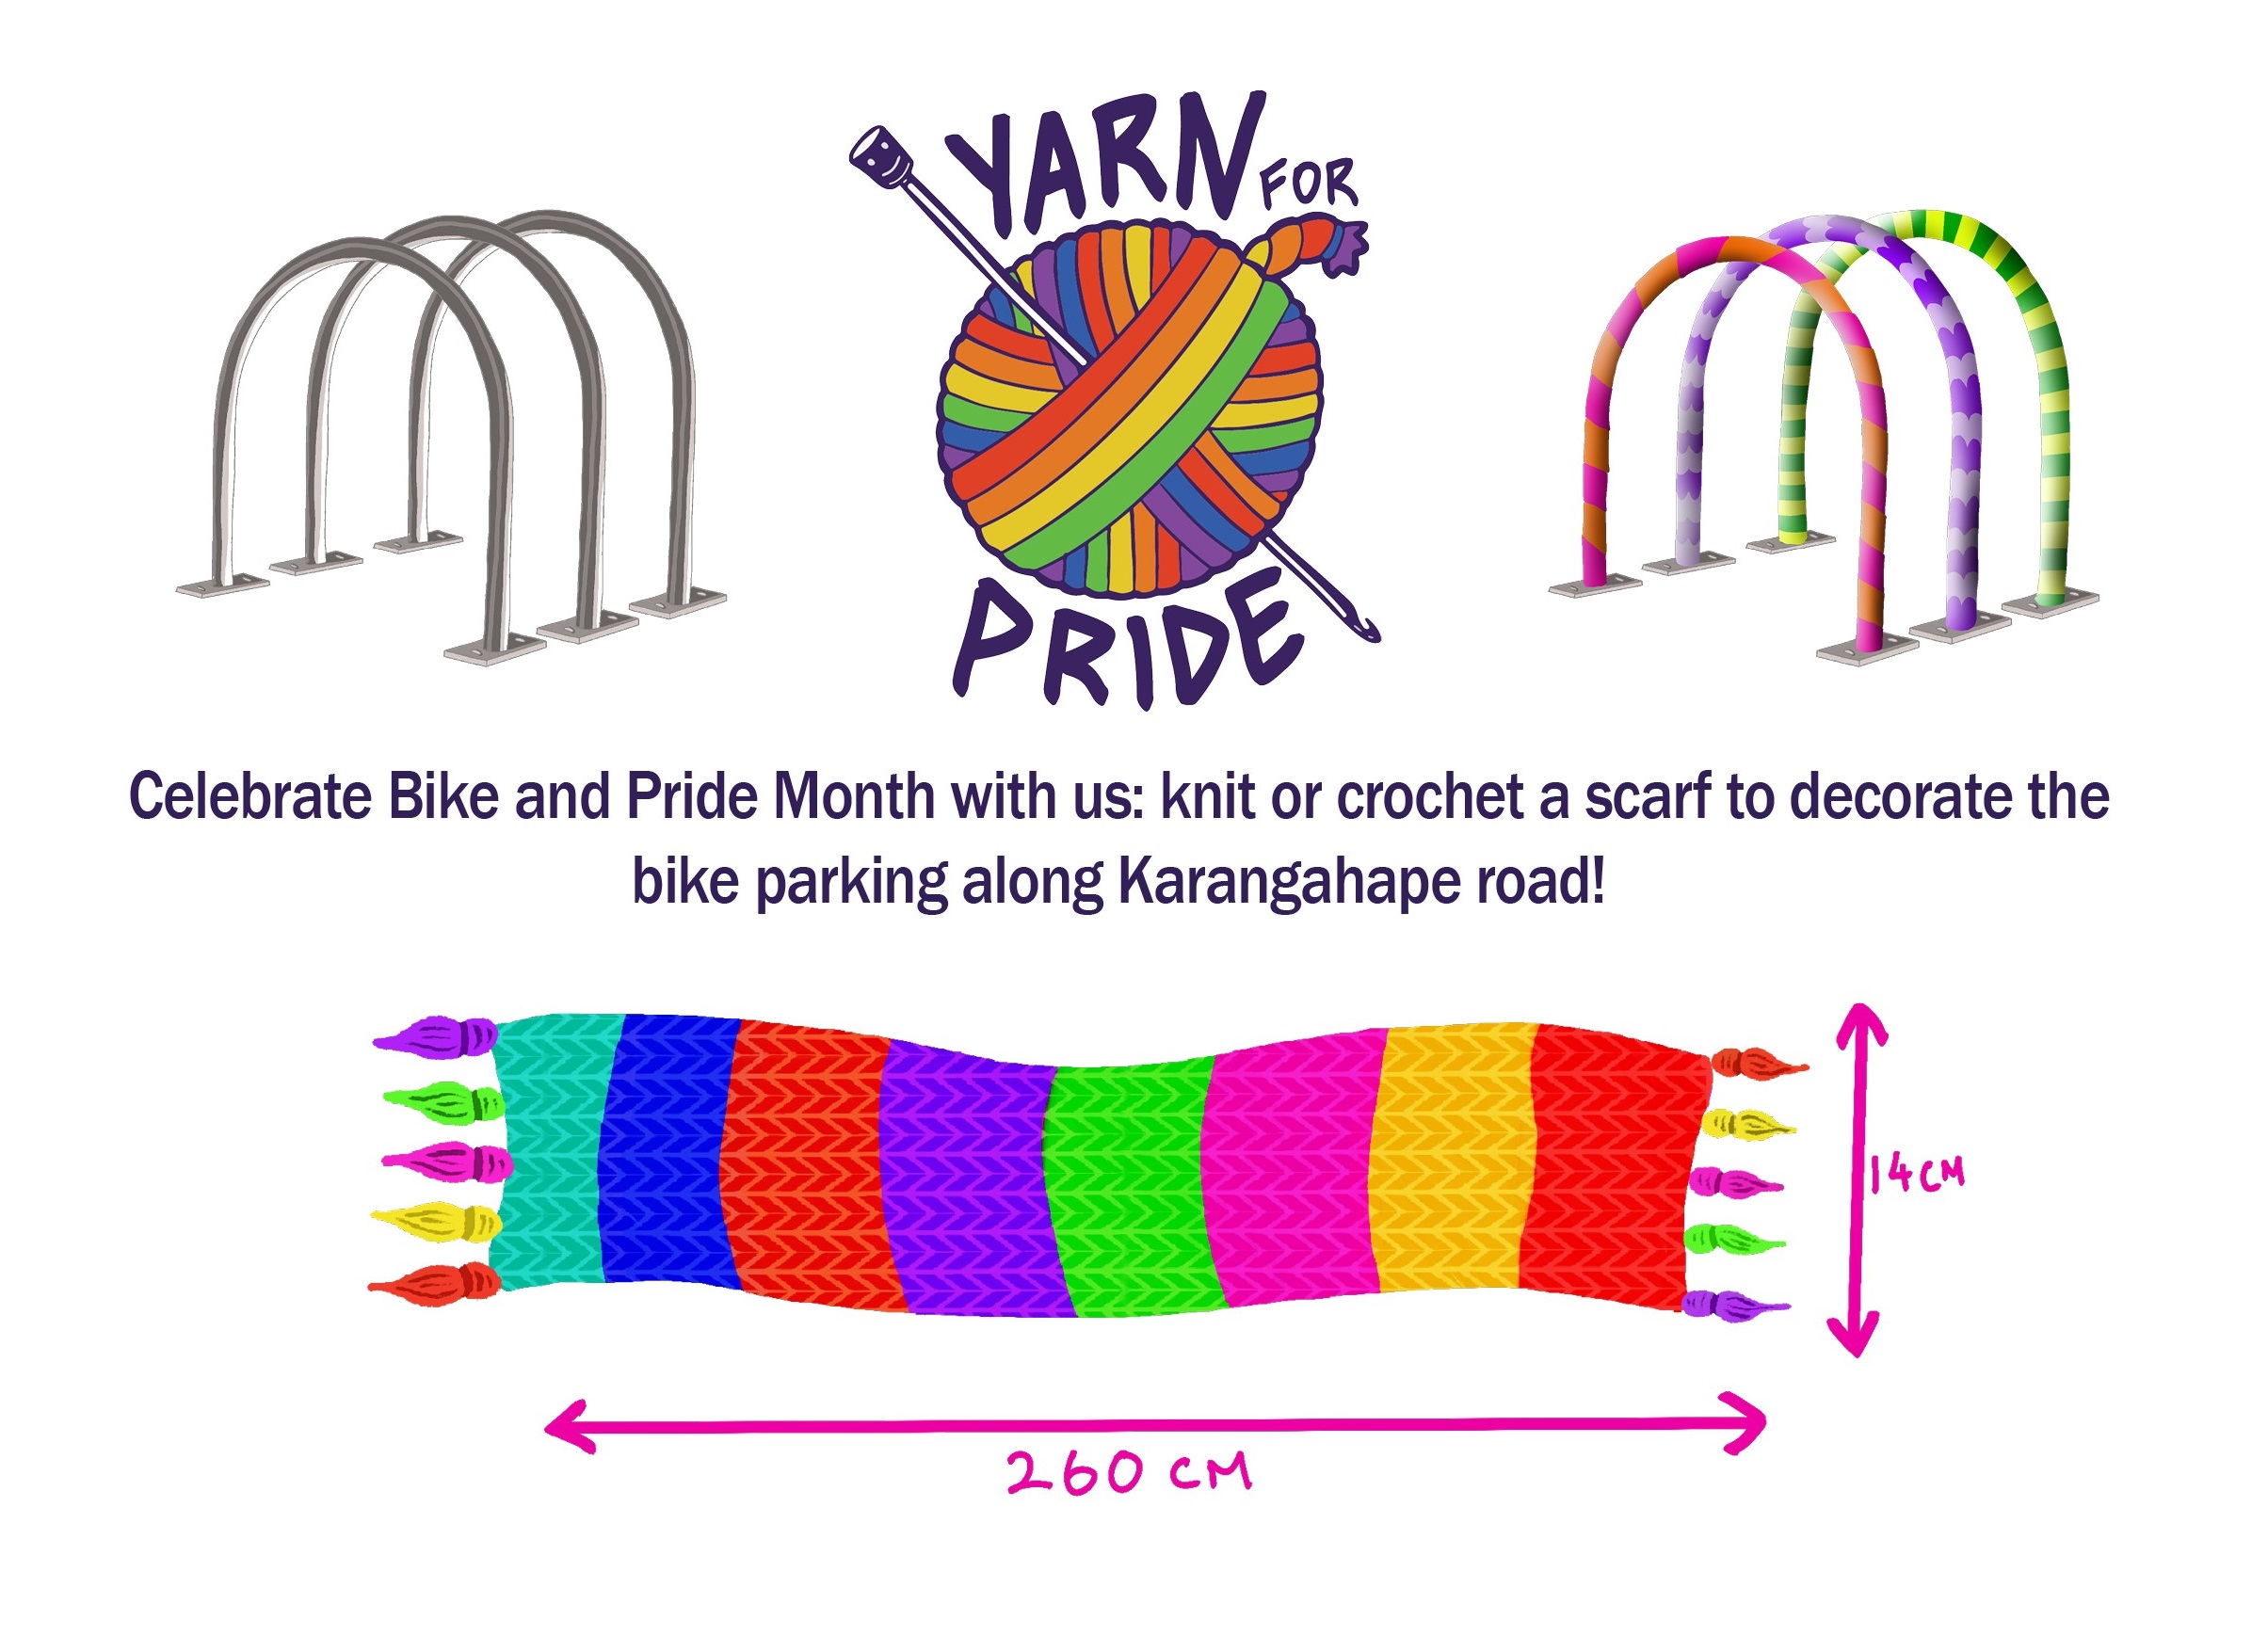 A rainbow ball of yarn with a crochet hook stuck through it and the words "yarn for pride". Under this is text which reads "Celebrate bike and pride month with us: knit or crochet a scarf to decorate the bike parking along Karangahape road!" There is an image of a rainbow scarf marked with the measurements 14cm by 260cm.